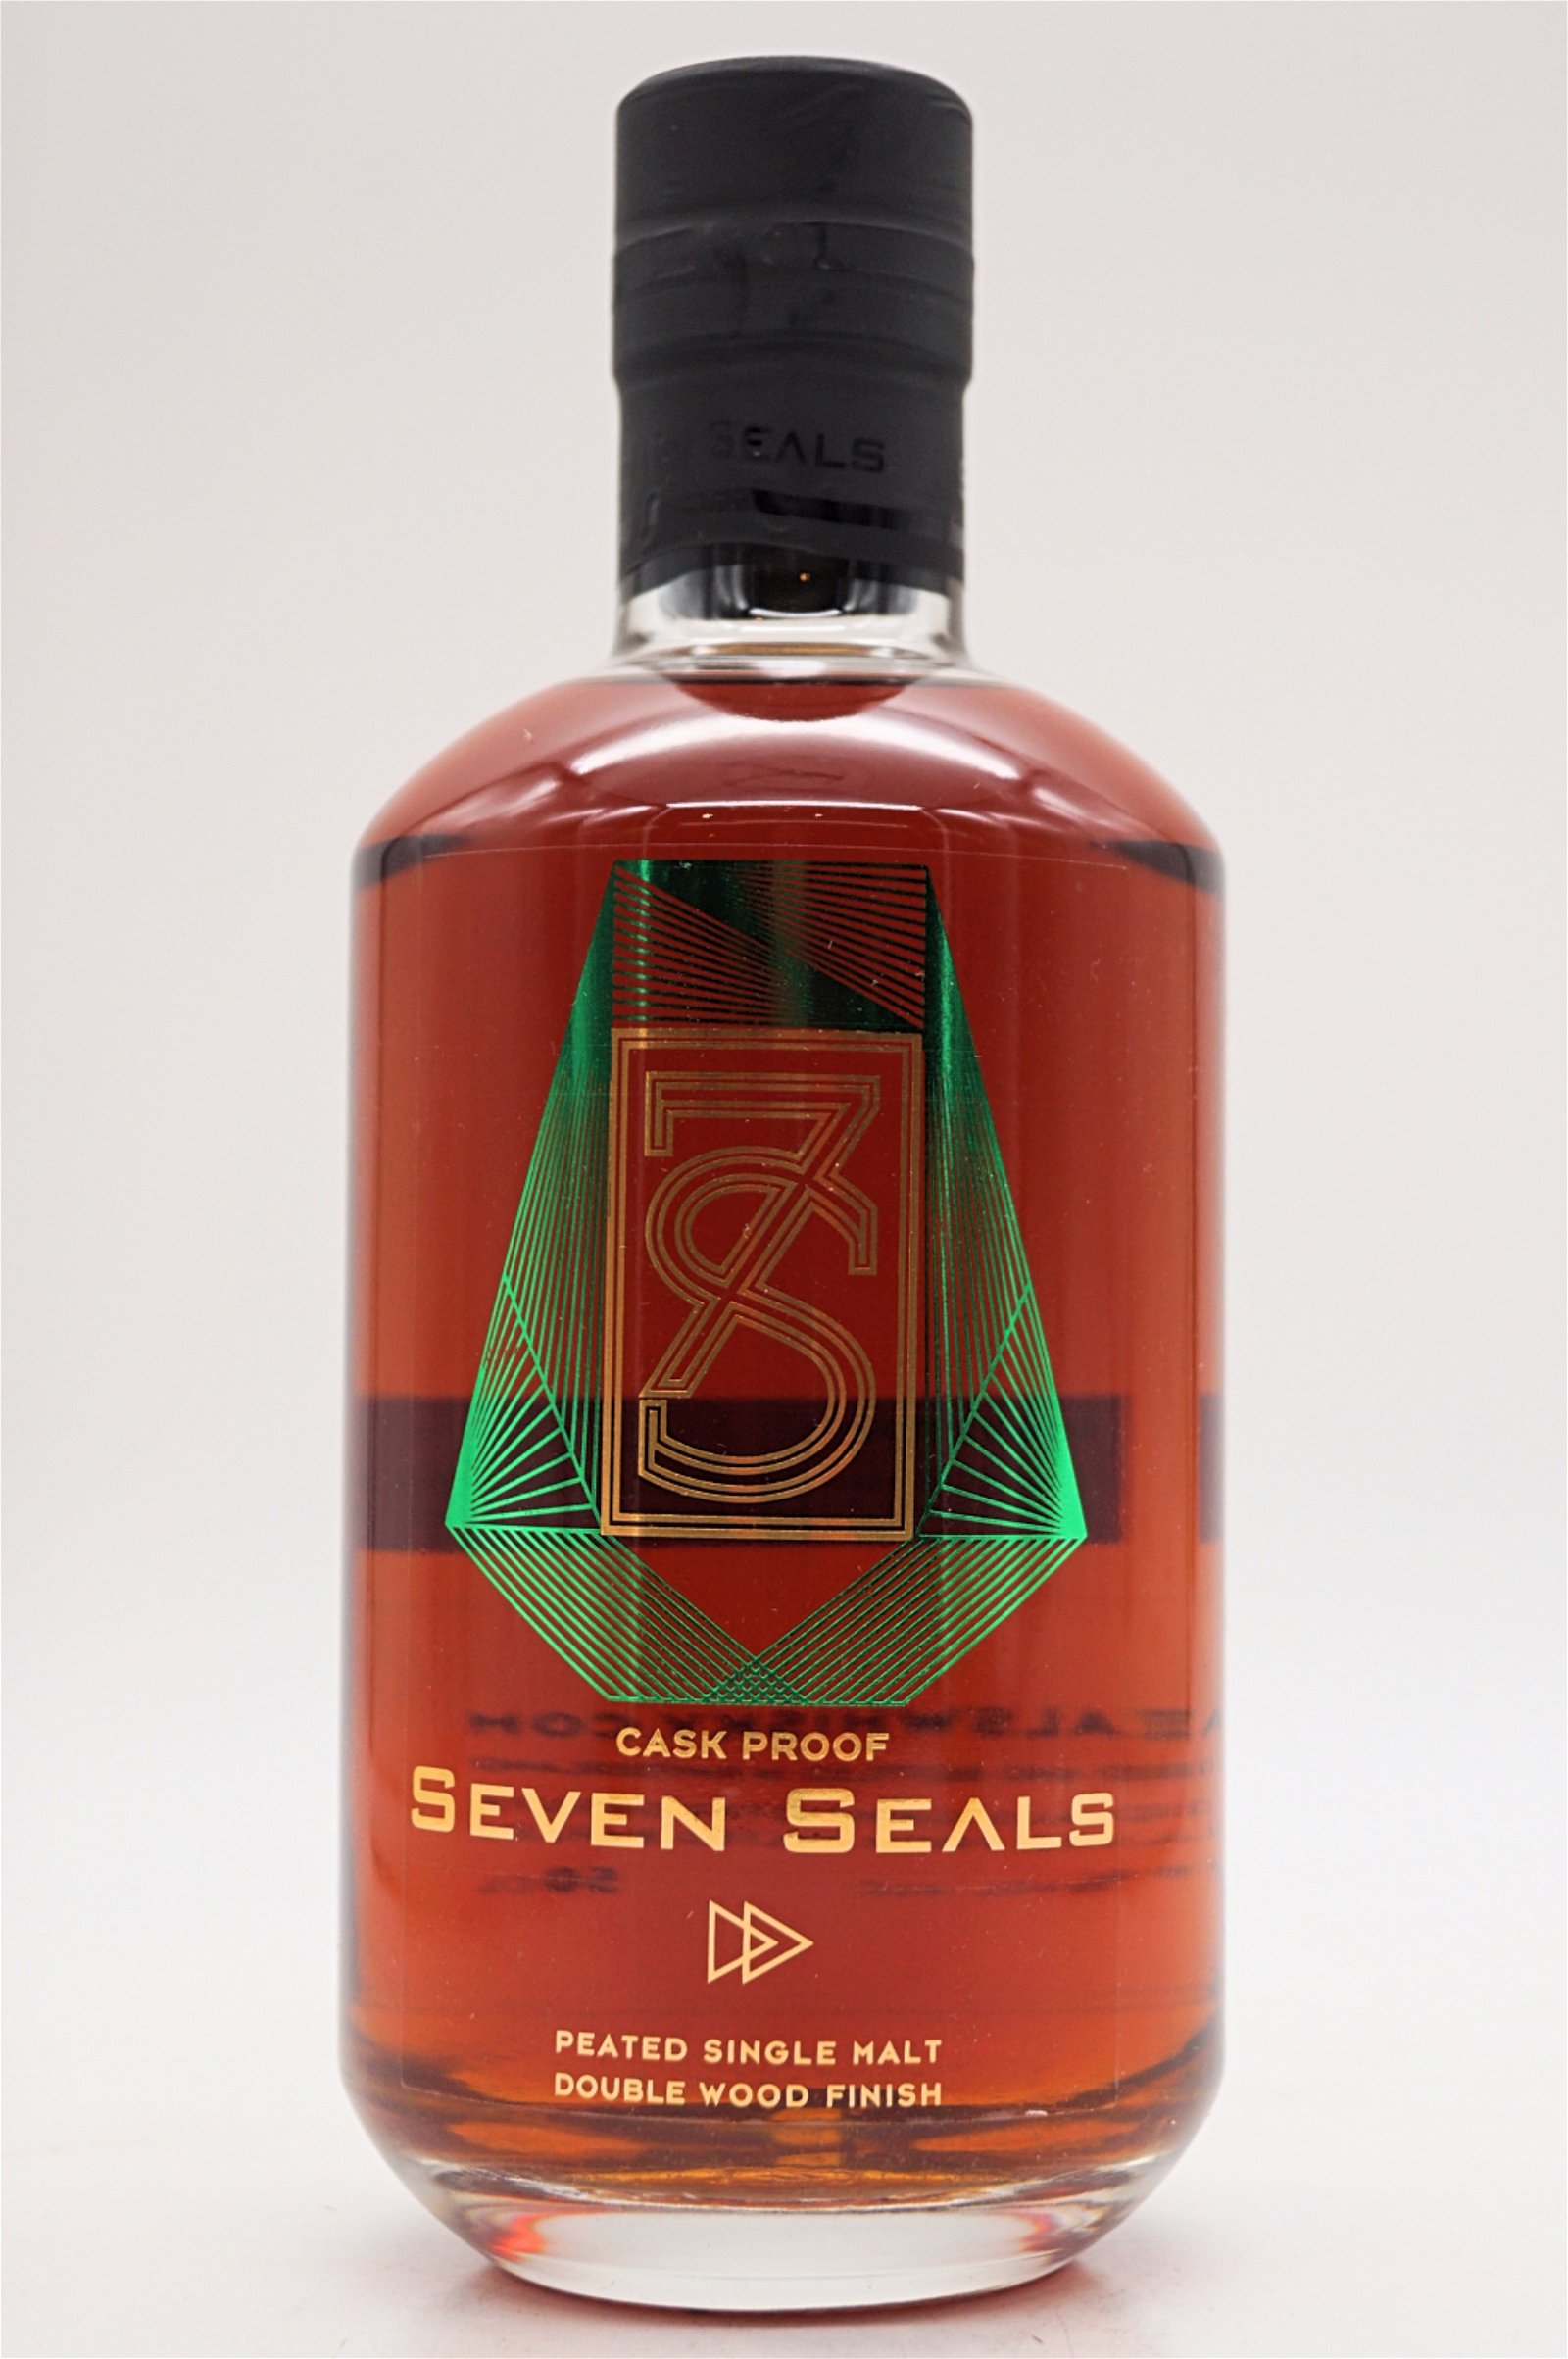 Seven Seals  Peated Double Wood Finish Cask Proof